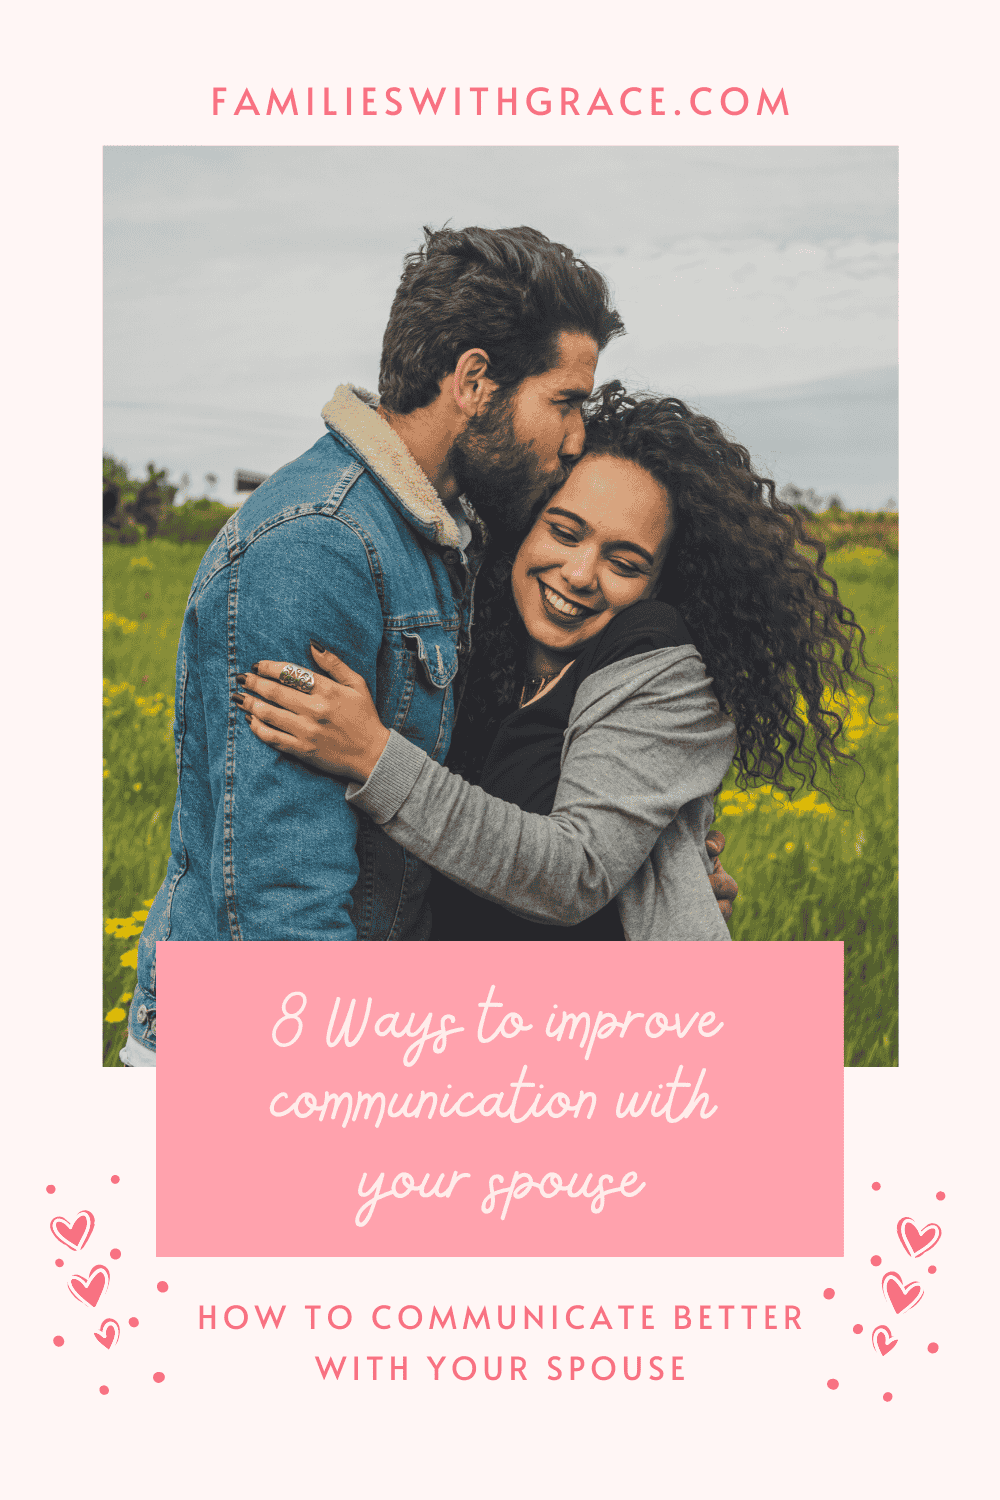 8 Ways to improve communication in your marriage